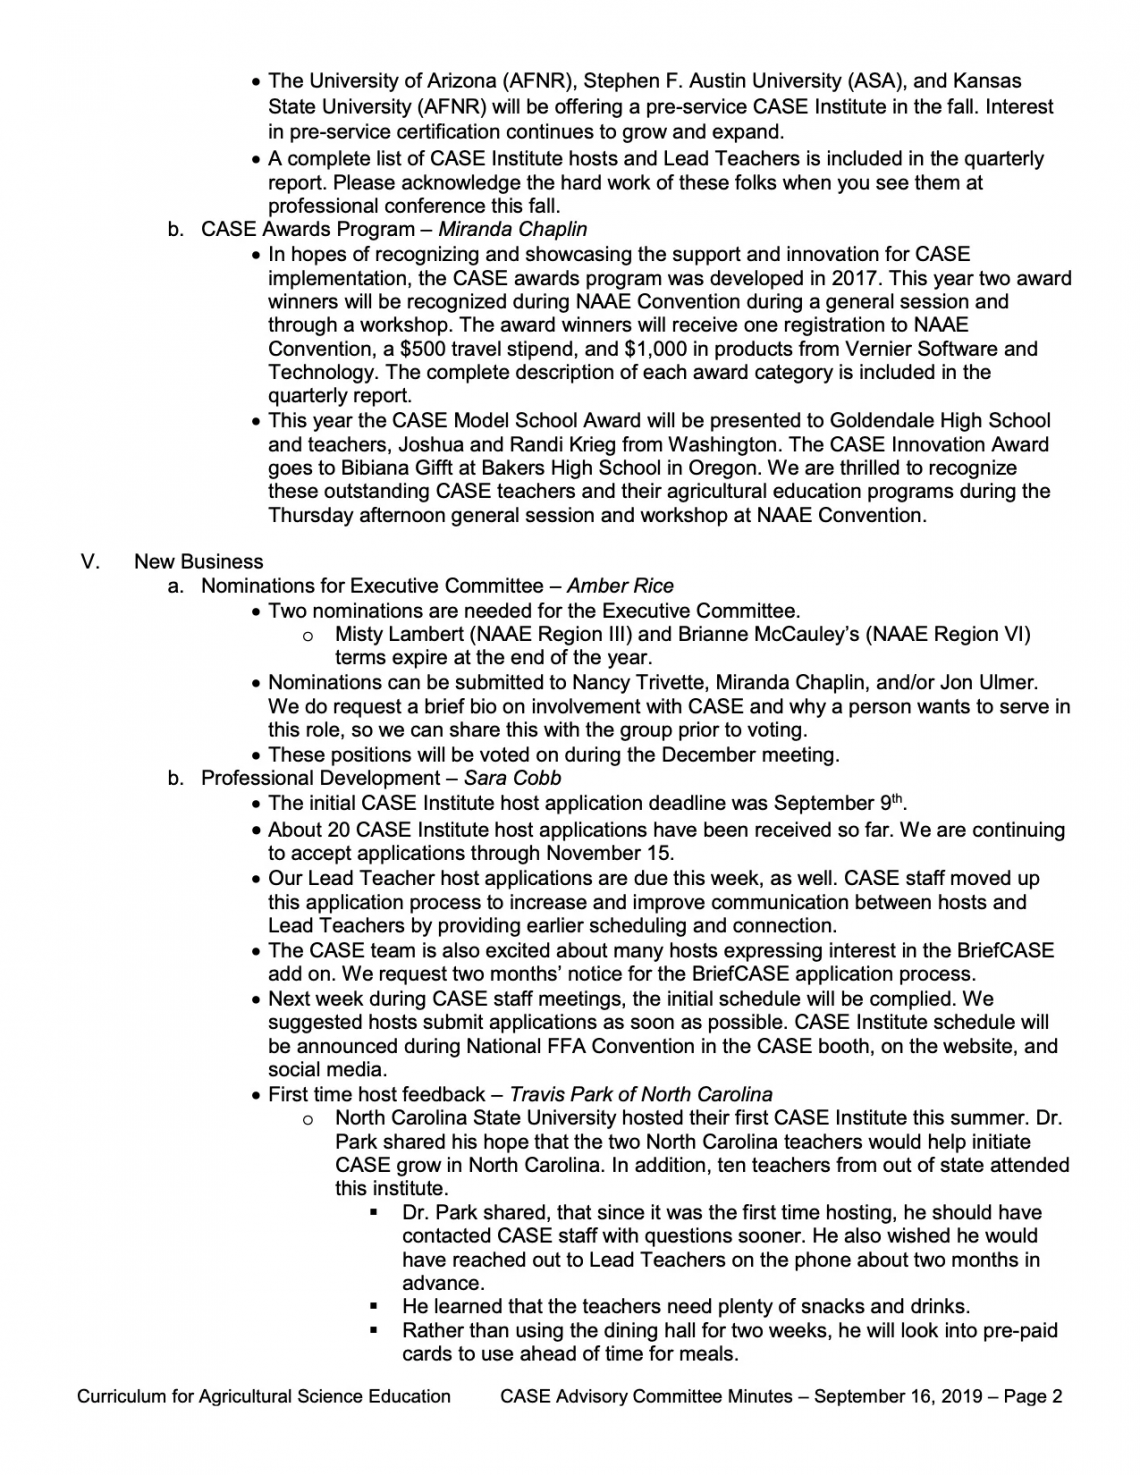 September 2019 meeting minutes page 2